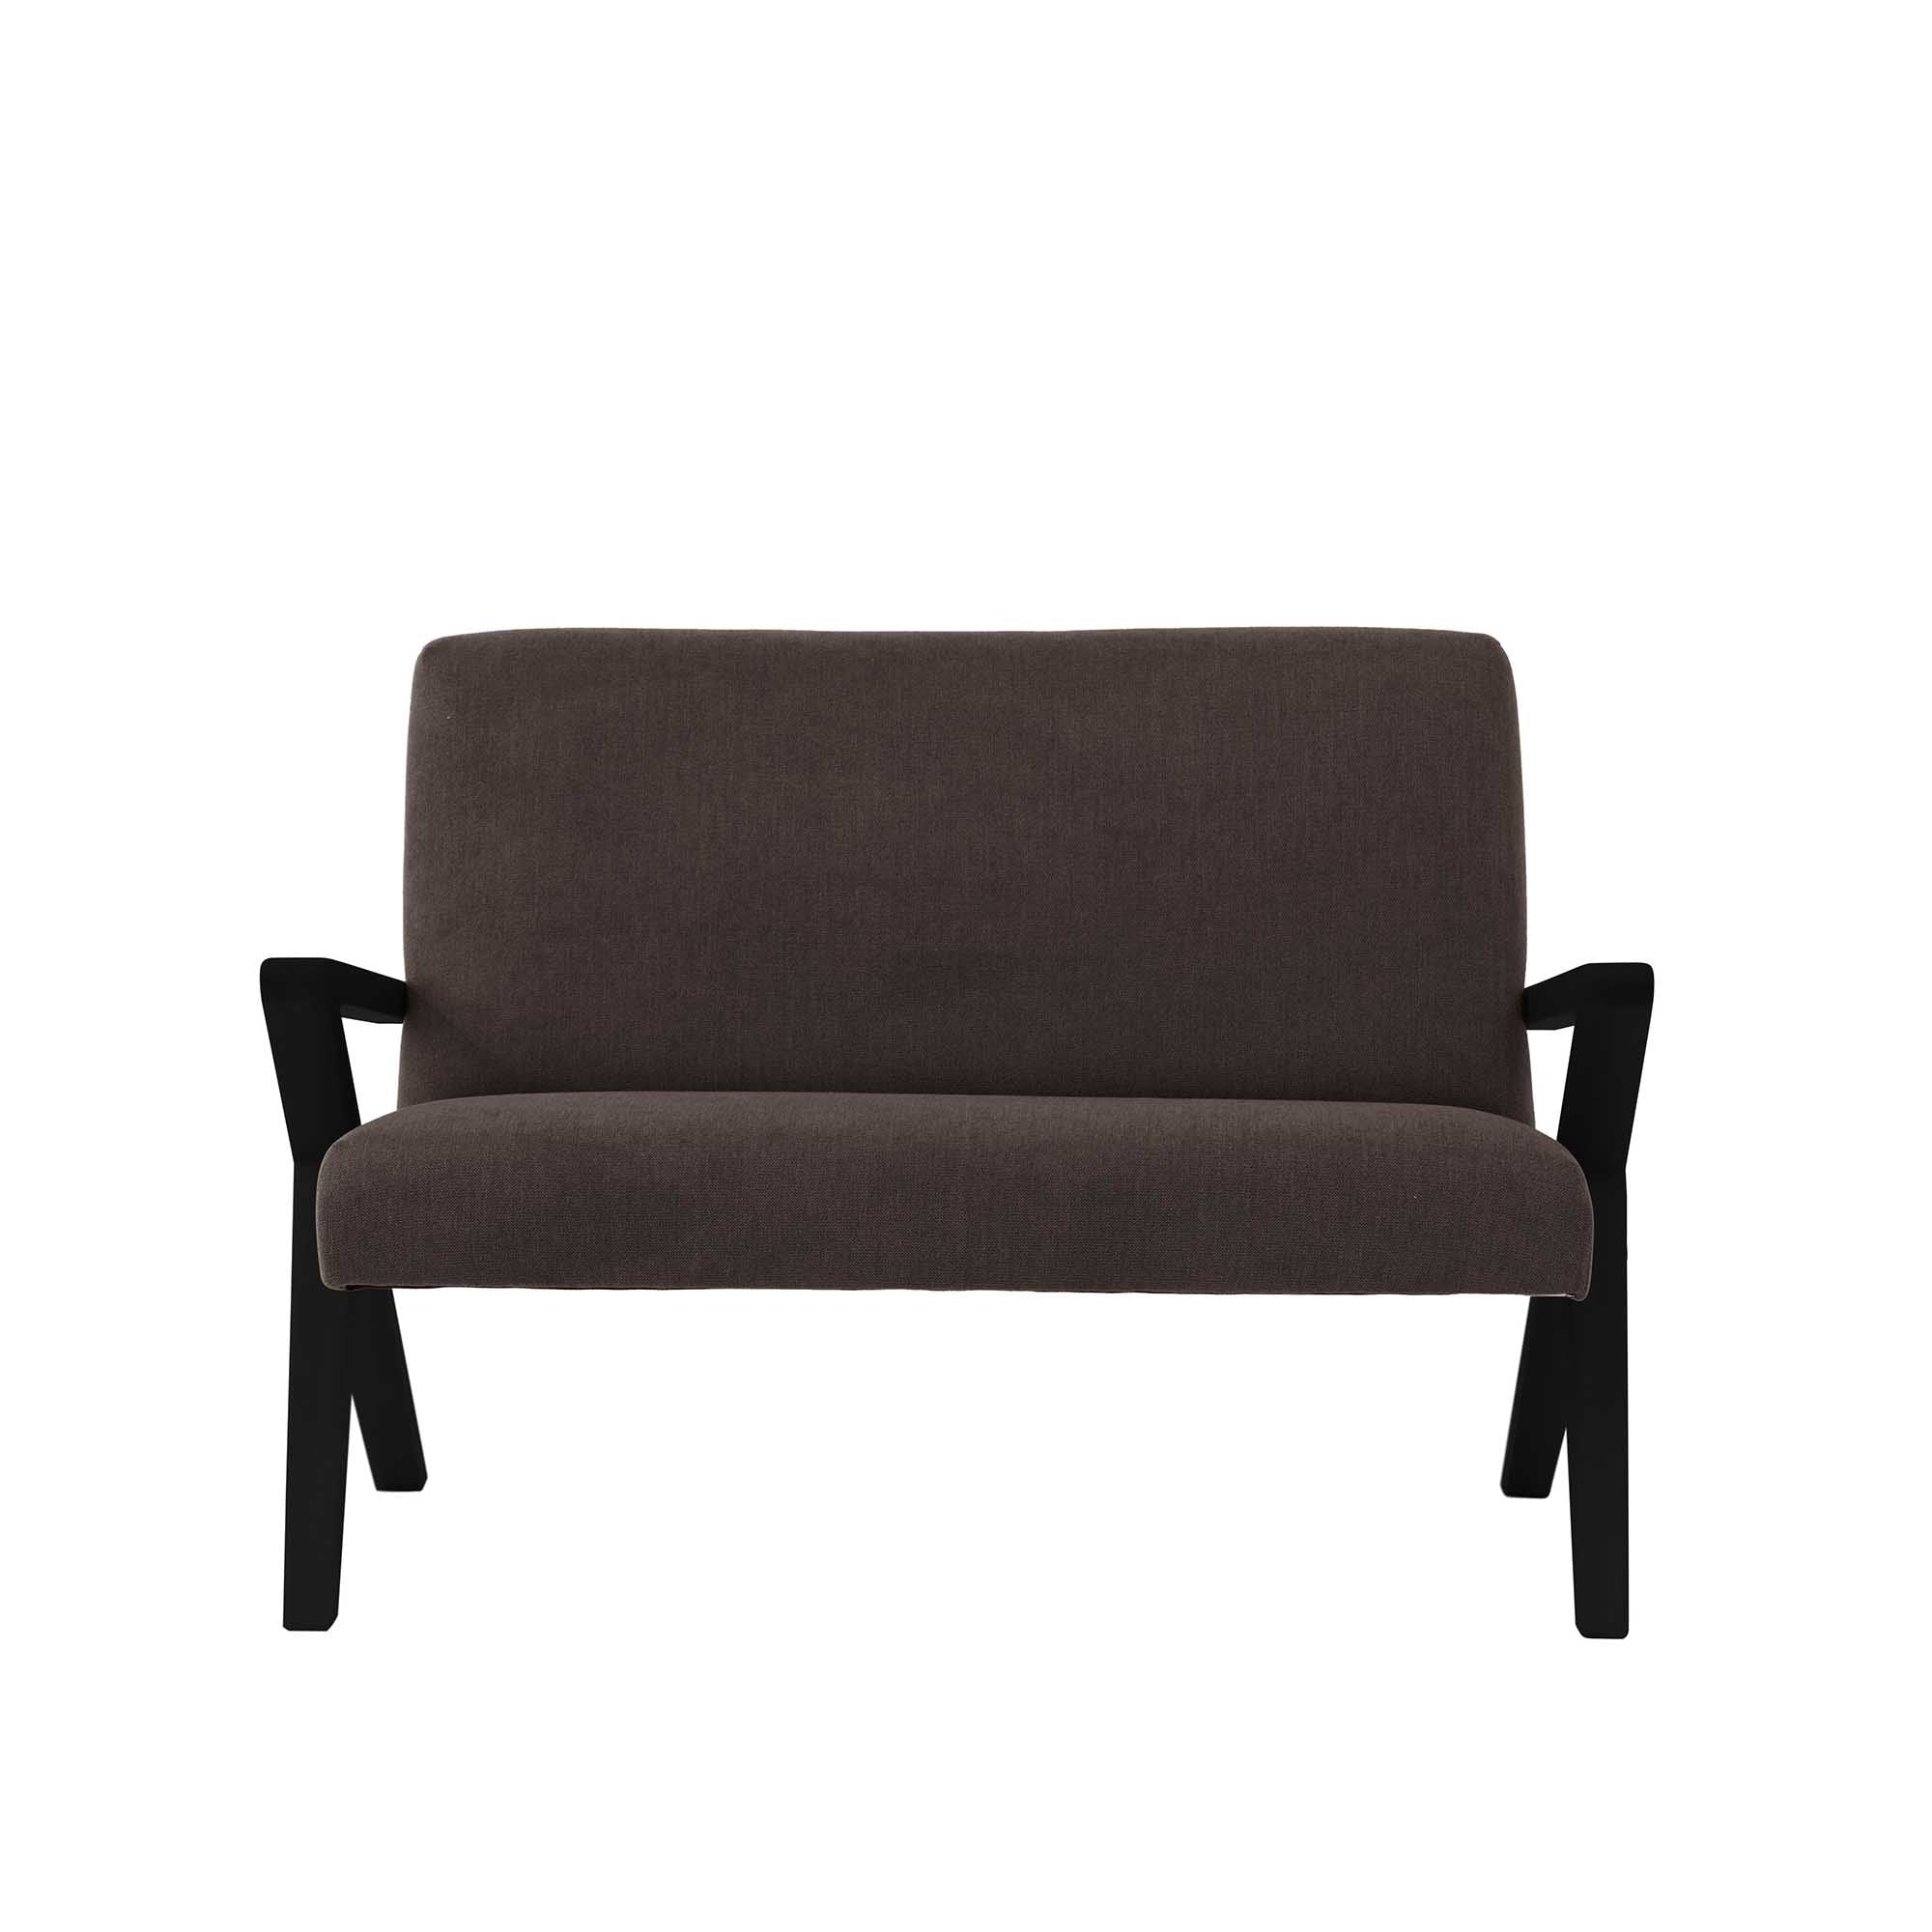  2-Seater Sofa, Beech Wood Frame, Black Lacquered, brown fabric, front view